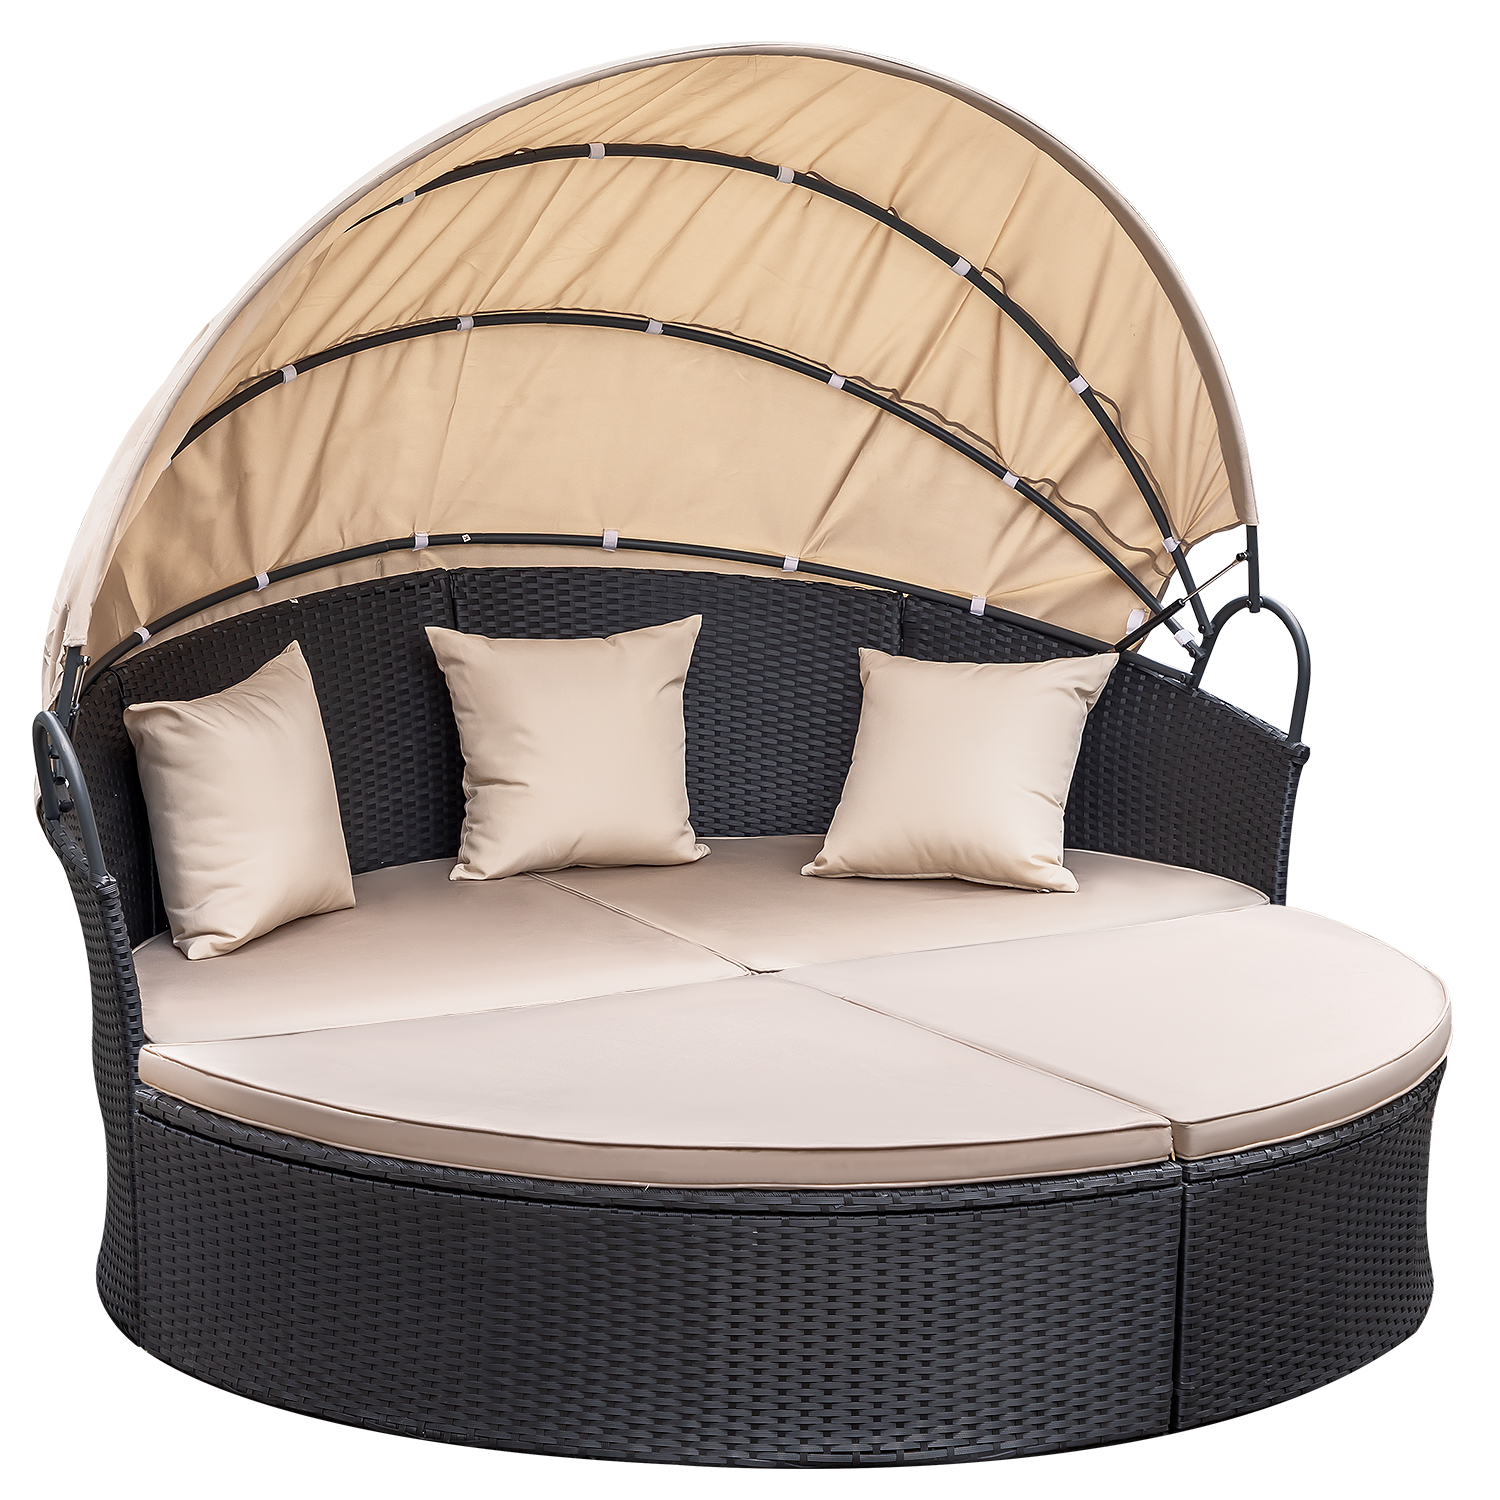 Homall Outdoor Daybed with Retractable Canopy Sectional Rattan Round Bed for Patio, Black & Beige - image 2 of 7